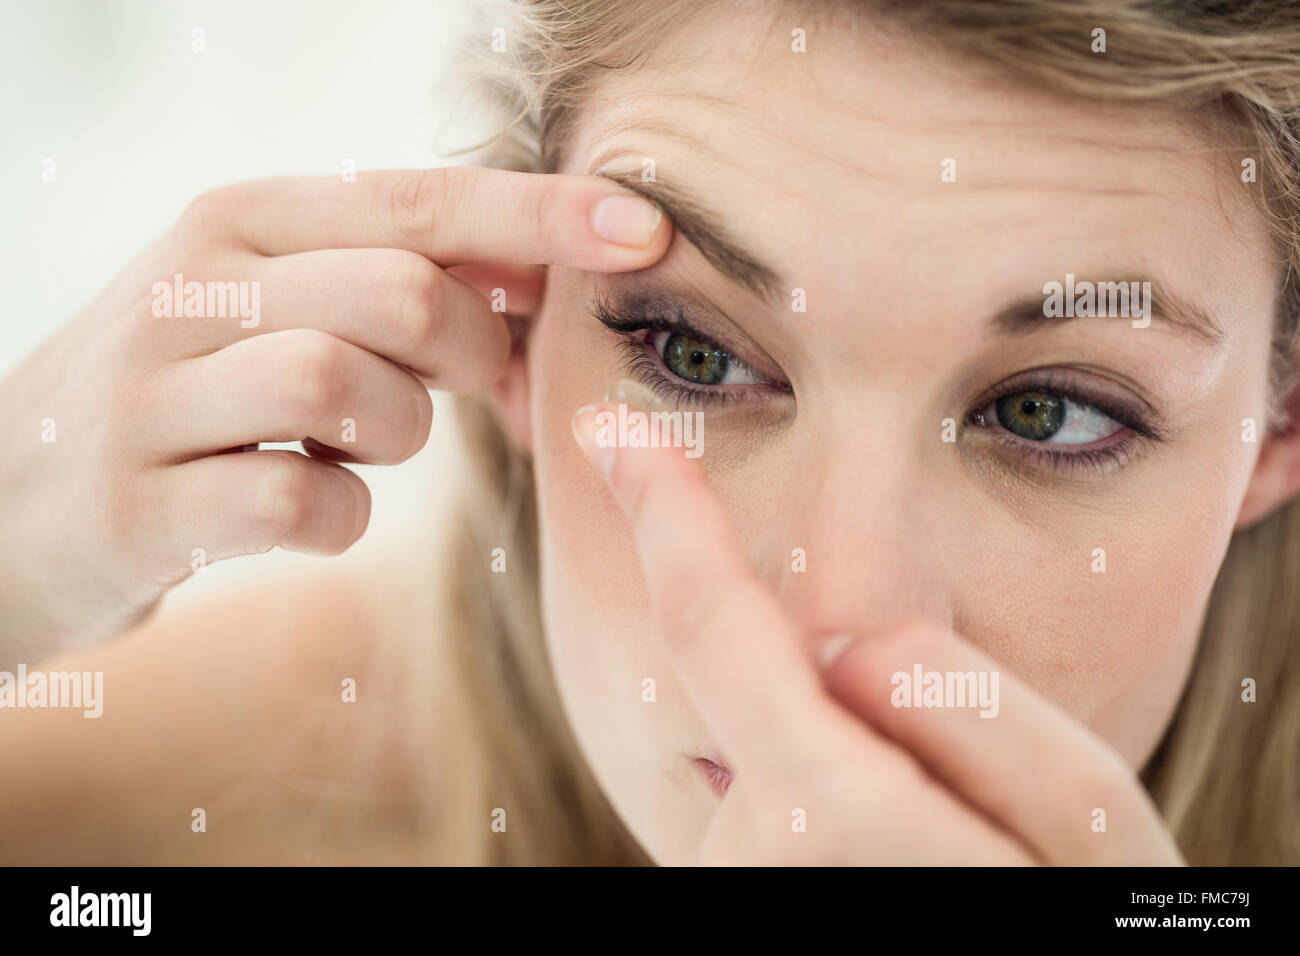 Close-up of young woman applying contact lens Banque D'Images